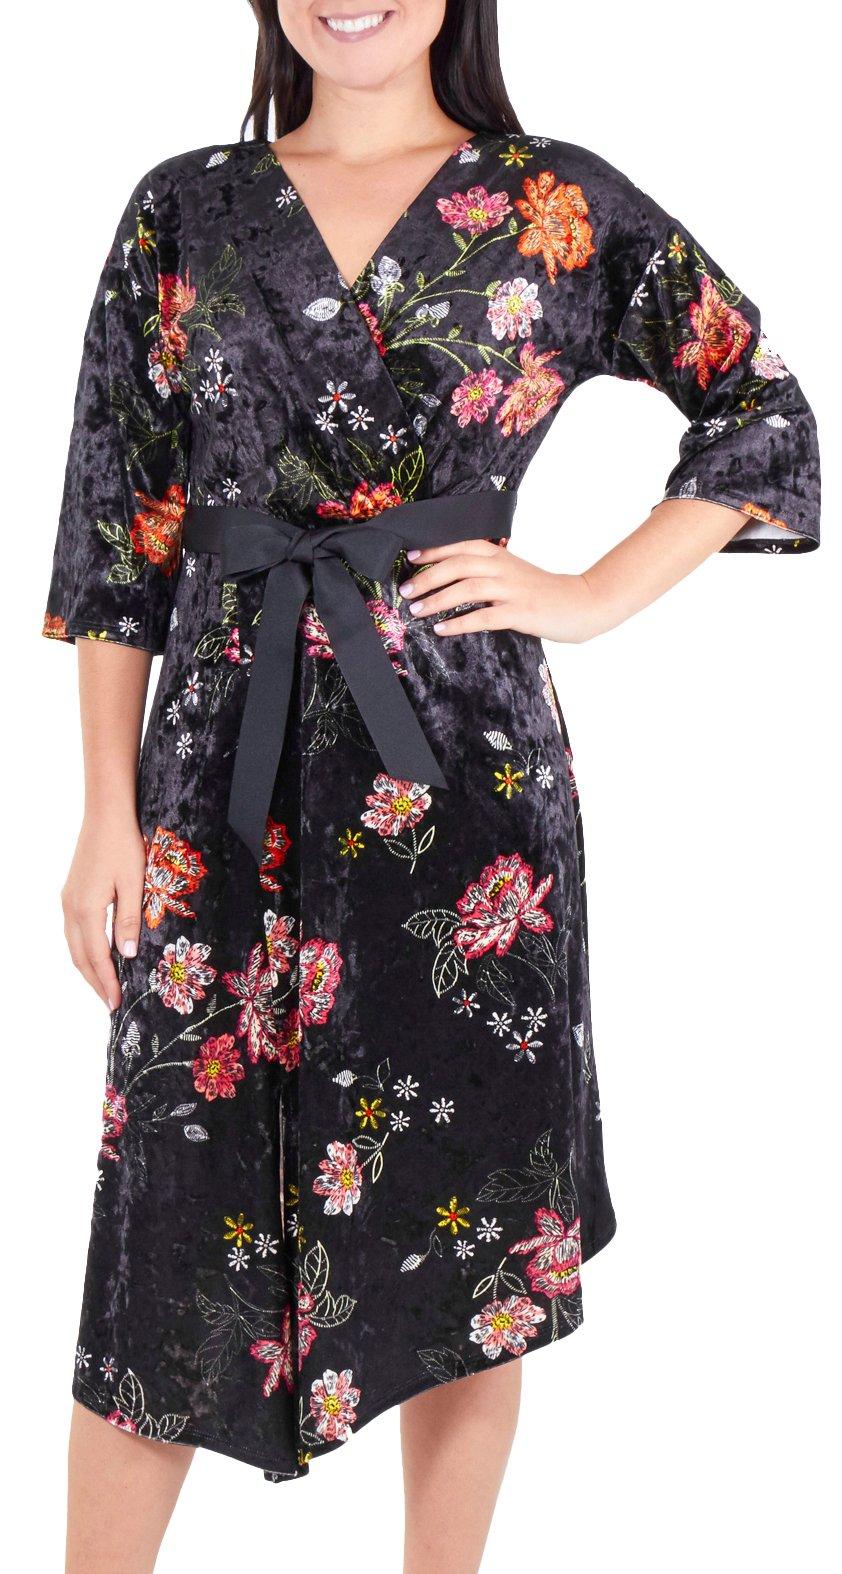 NY Collection Womens Floral Velvet Faux Wrap Dress